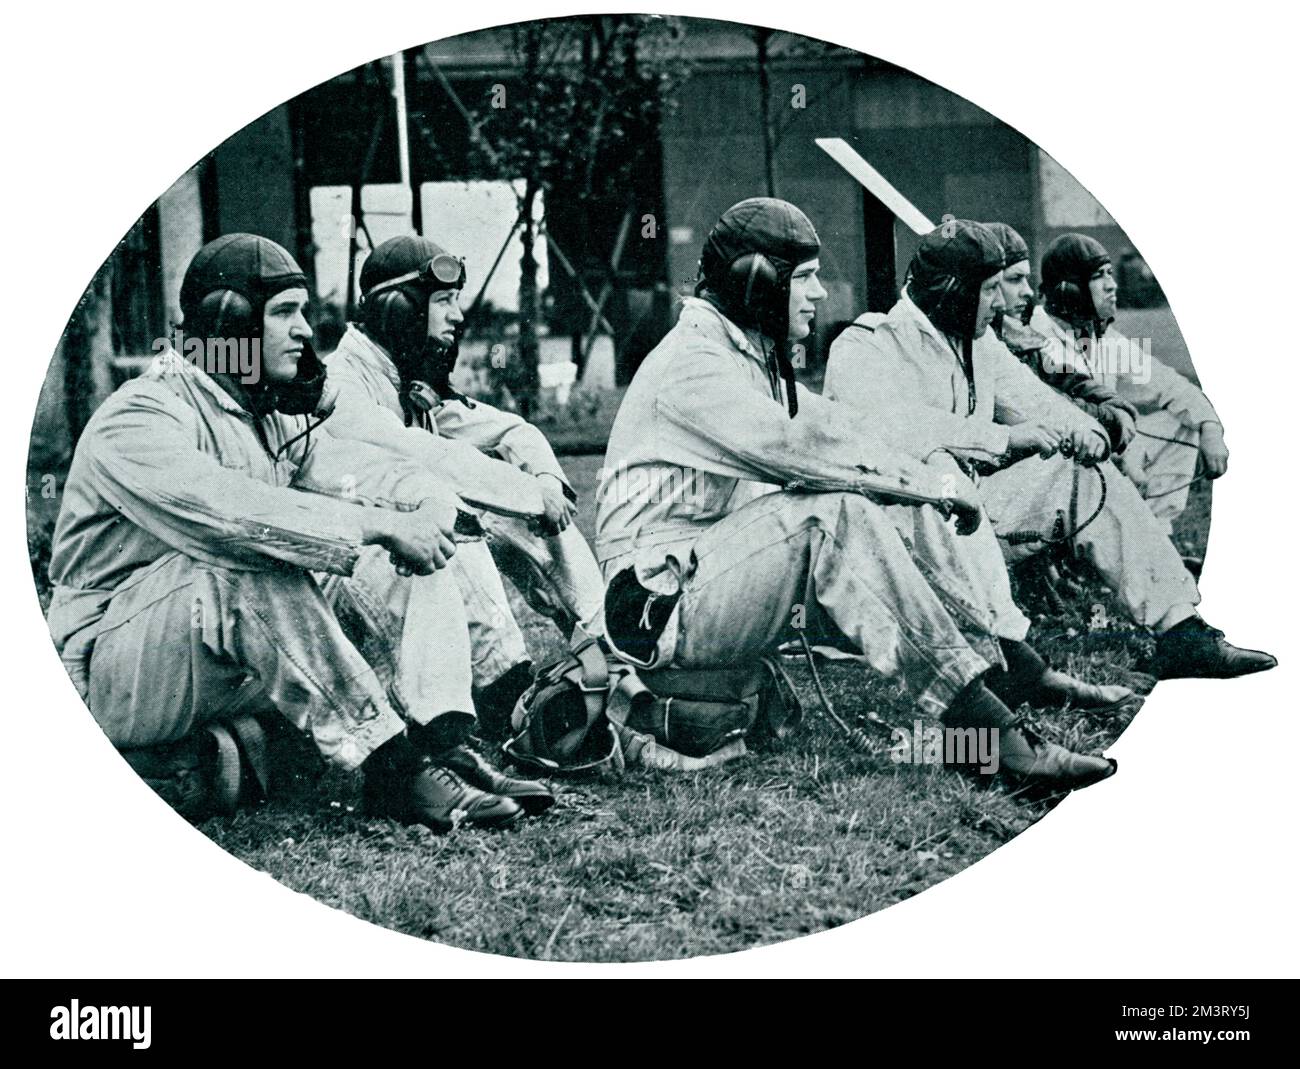 Interceptor aircraft pilots sitting on their parachutes as they wait for the order to fly, a few weeks after the outbreak of war. Interceptor pilots were used to attack enemy planes as they approached and these men are shown in full uniform, complete with earphones and goggles.     Date: 1939 Stock Photo